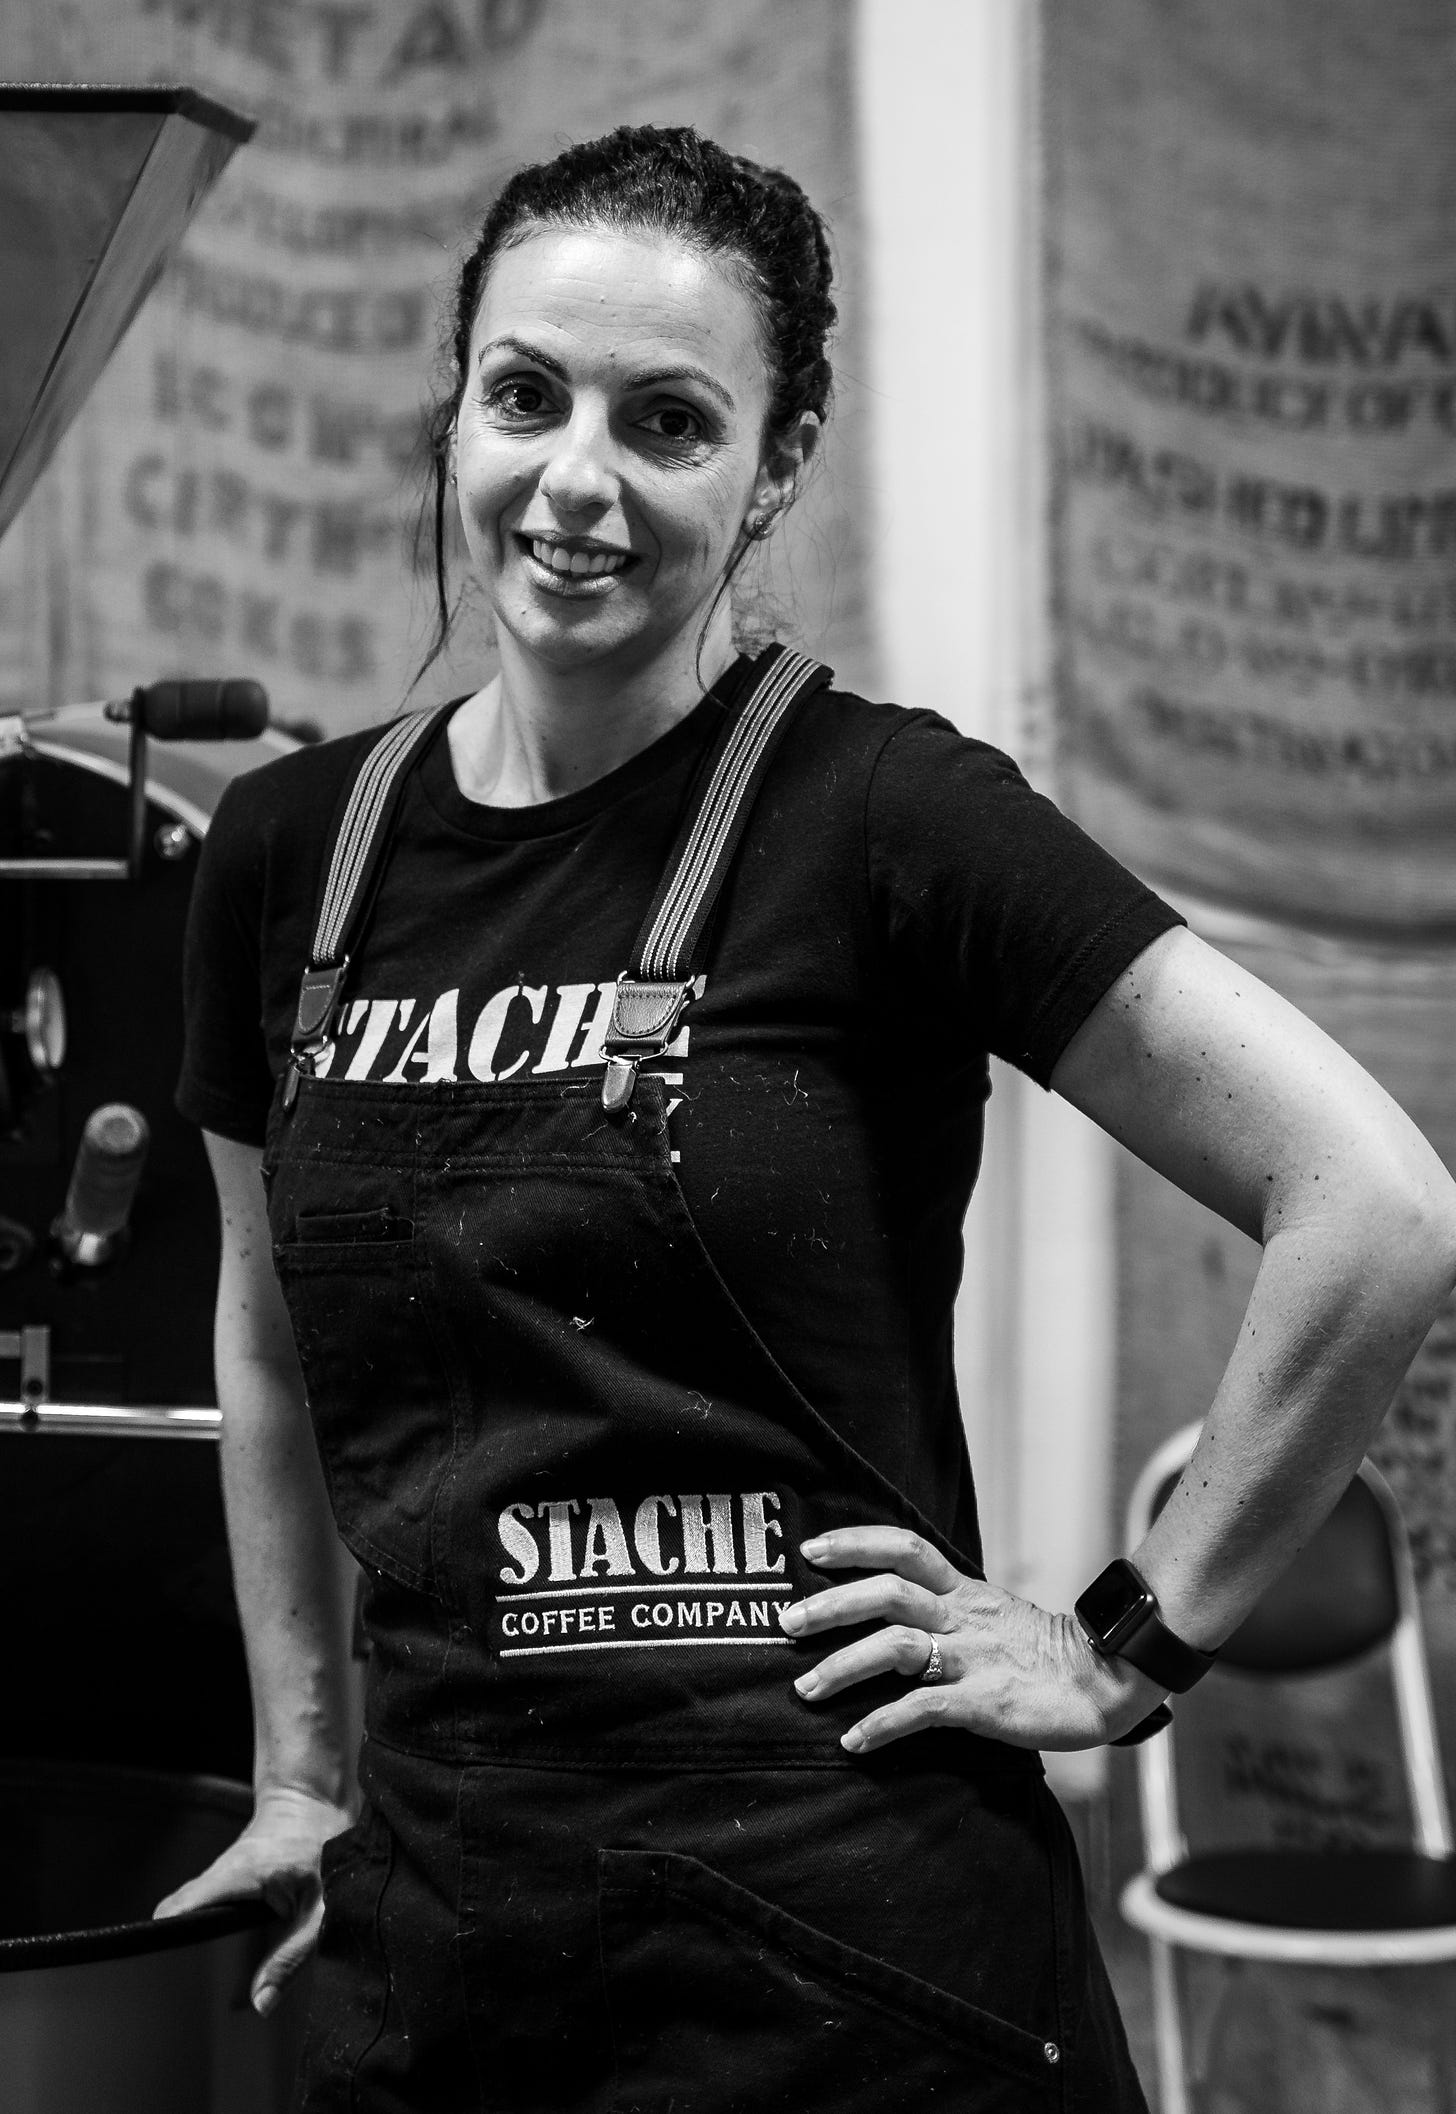 Black and white photograph of Inbal Kalin with her hand on her hip wearing a Stache Coffee Company t-shirt and apron next to a coffee roasting machine.